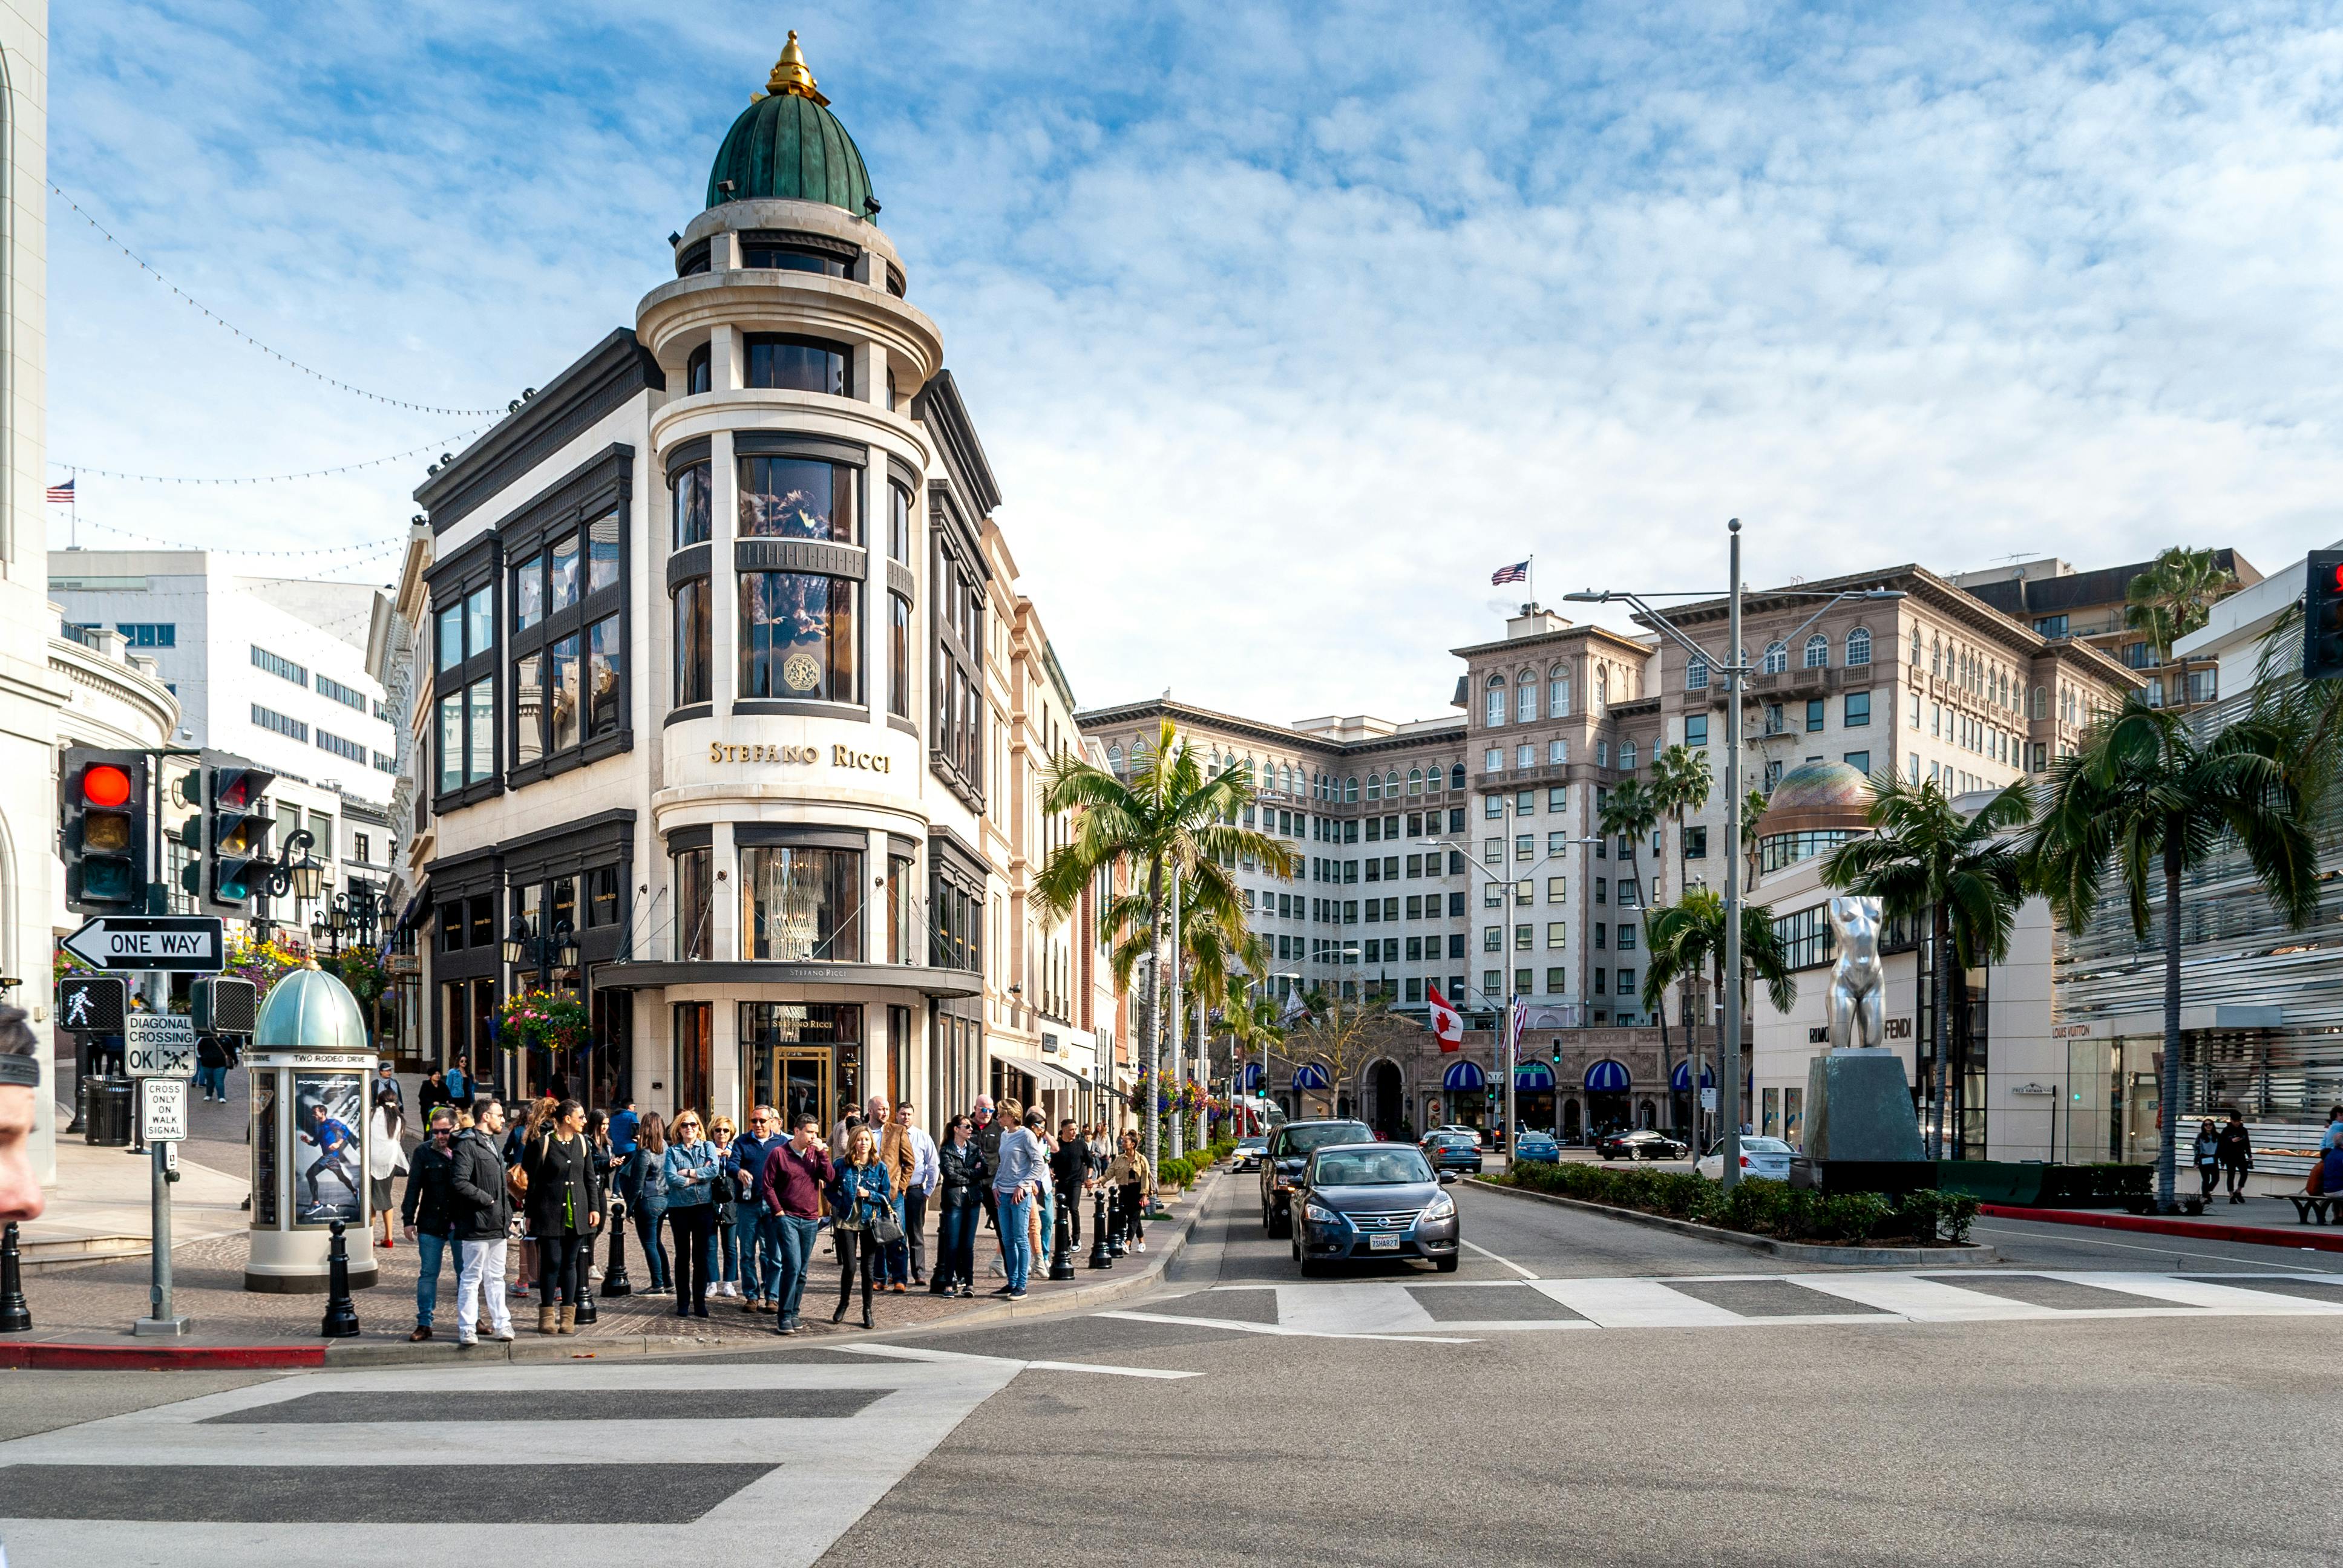 Louis vuitton store rodeo drive hi-res stock photography and